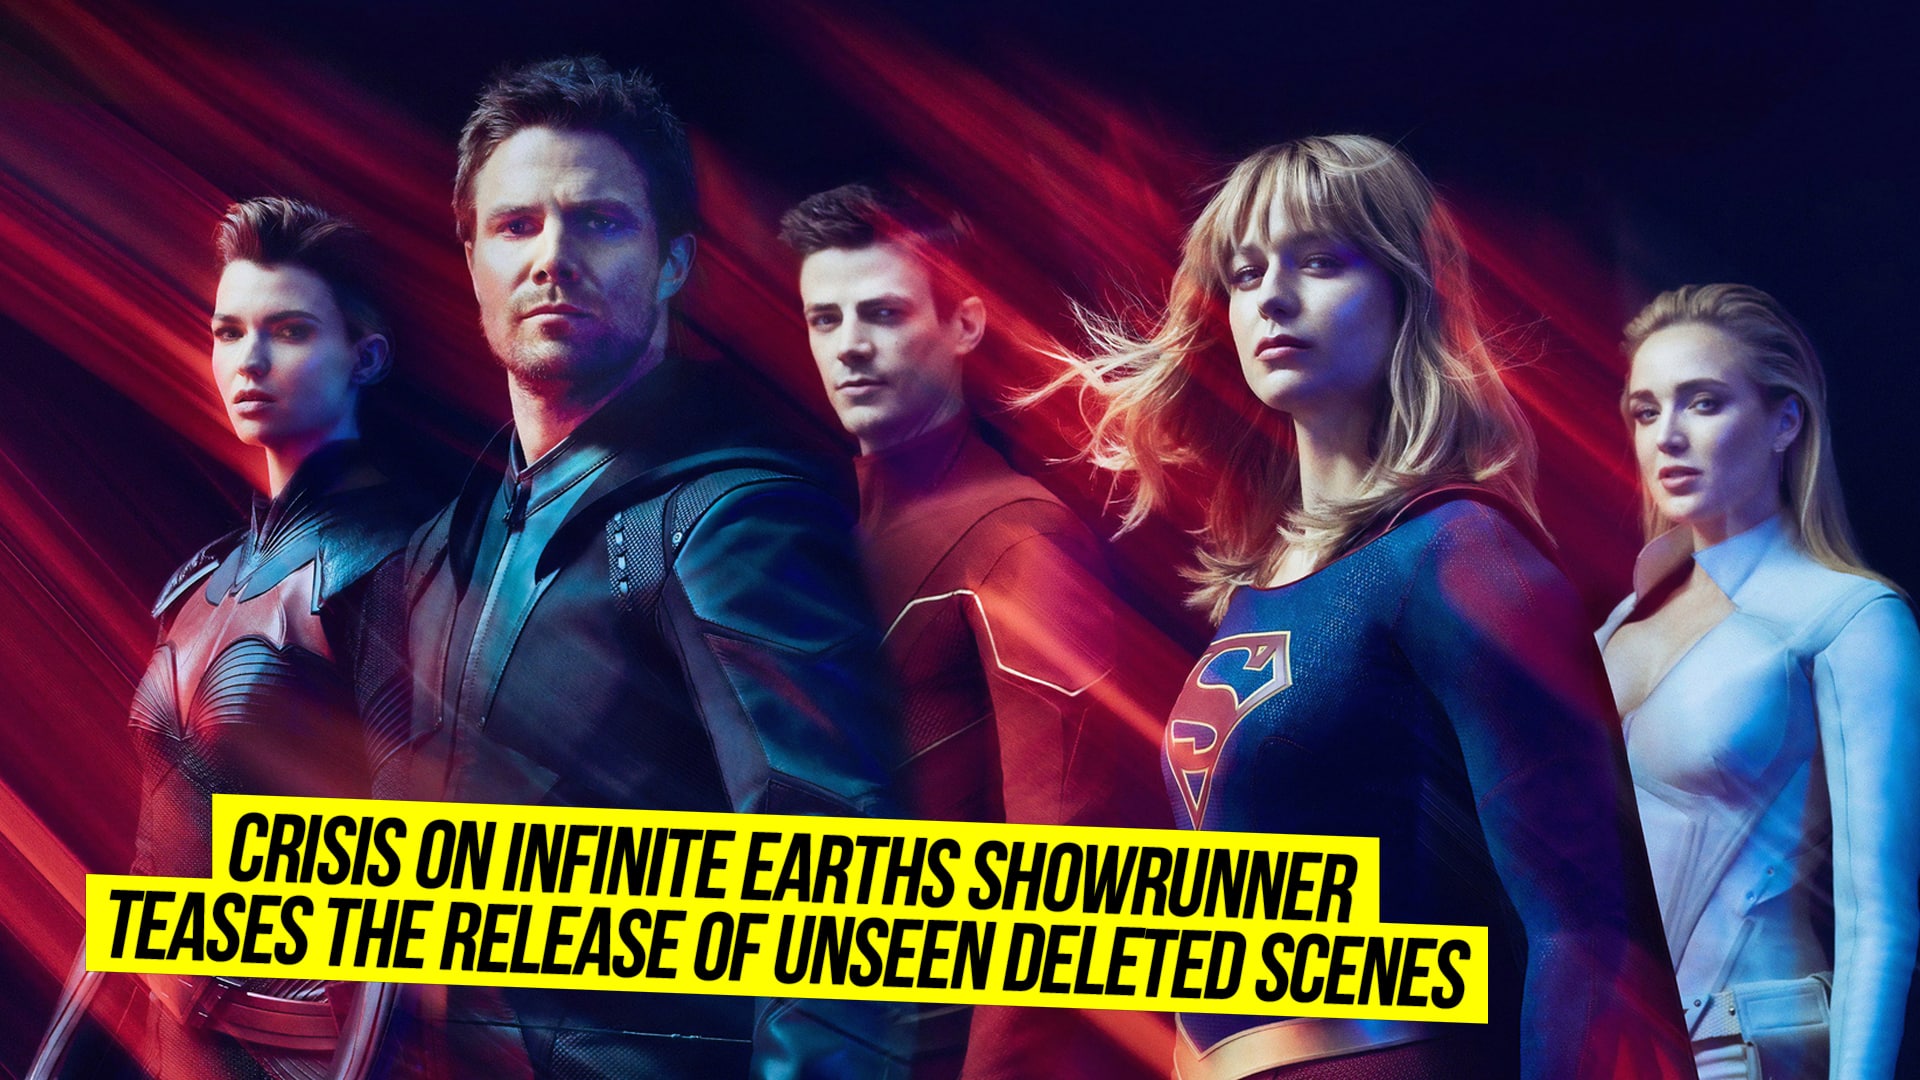 Crisis On Infinite Earths Showrunner Teases The Release Of Unseen Deleted Scenes